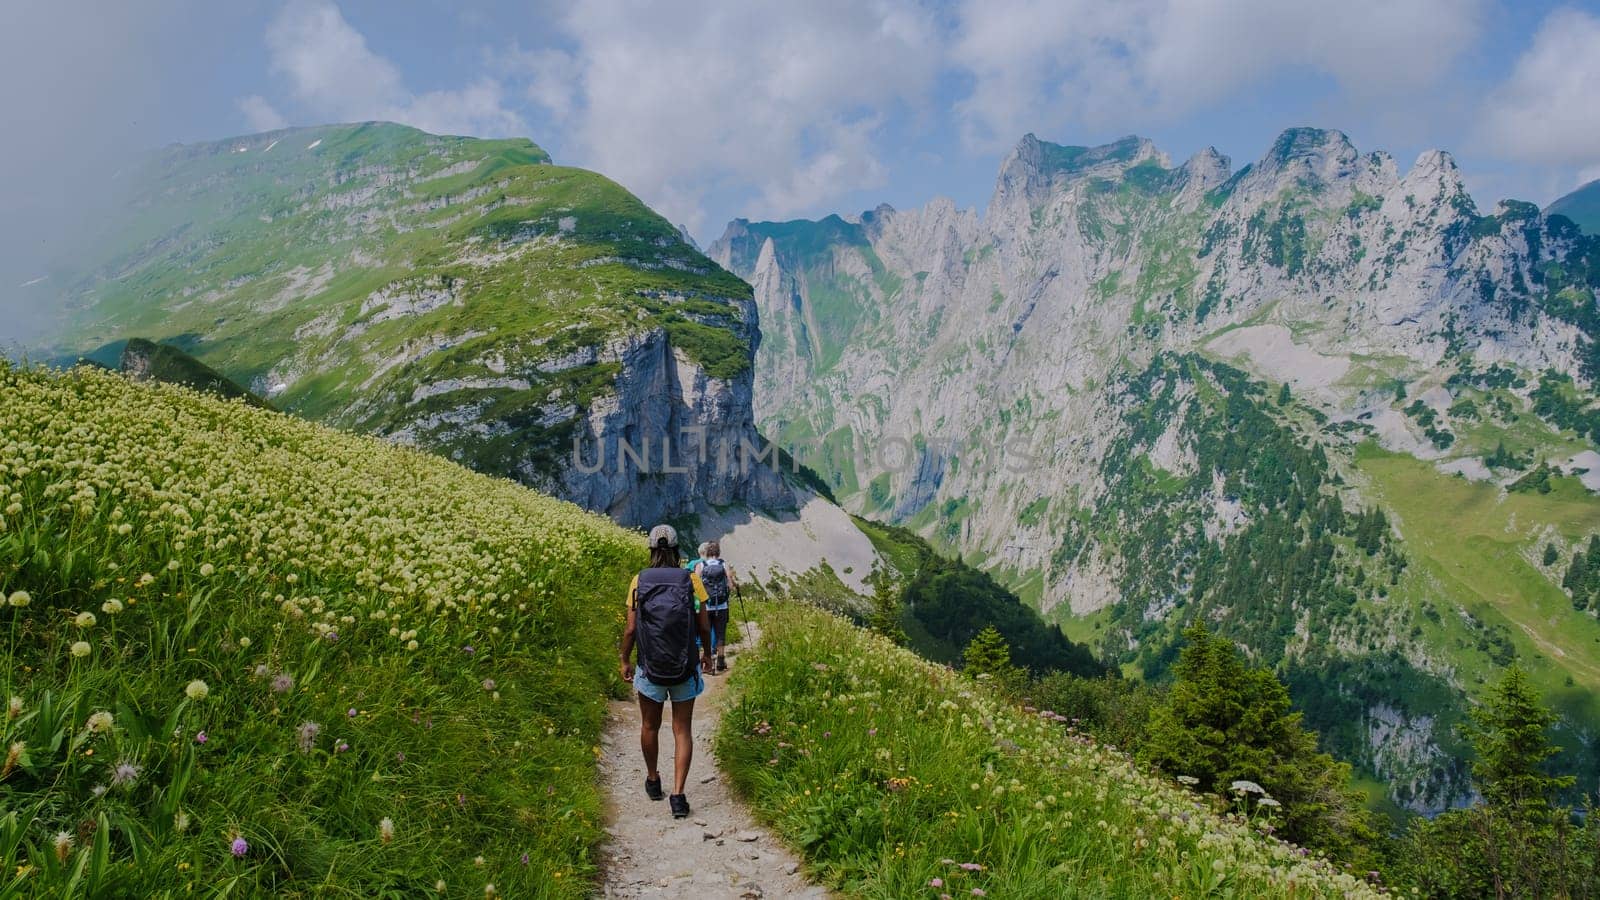 Asian women hiking in the Swiss Alps mountains at summer vacation with a backpack and hiking boots by fokkebok